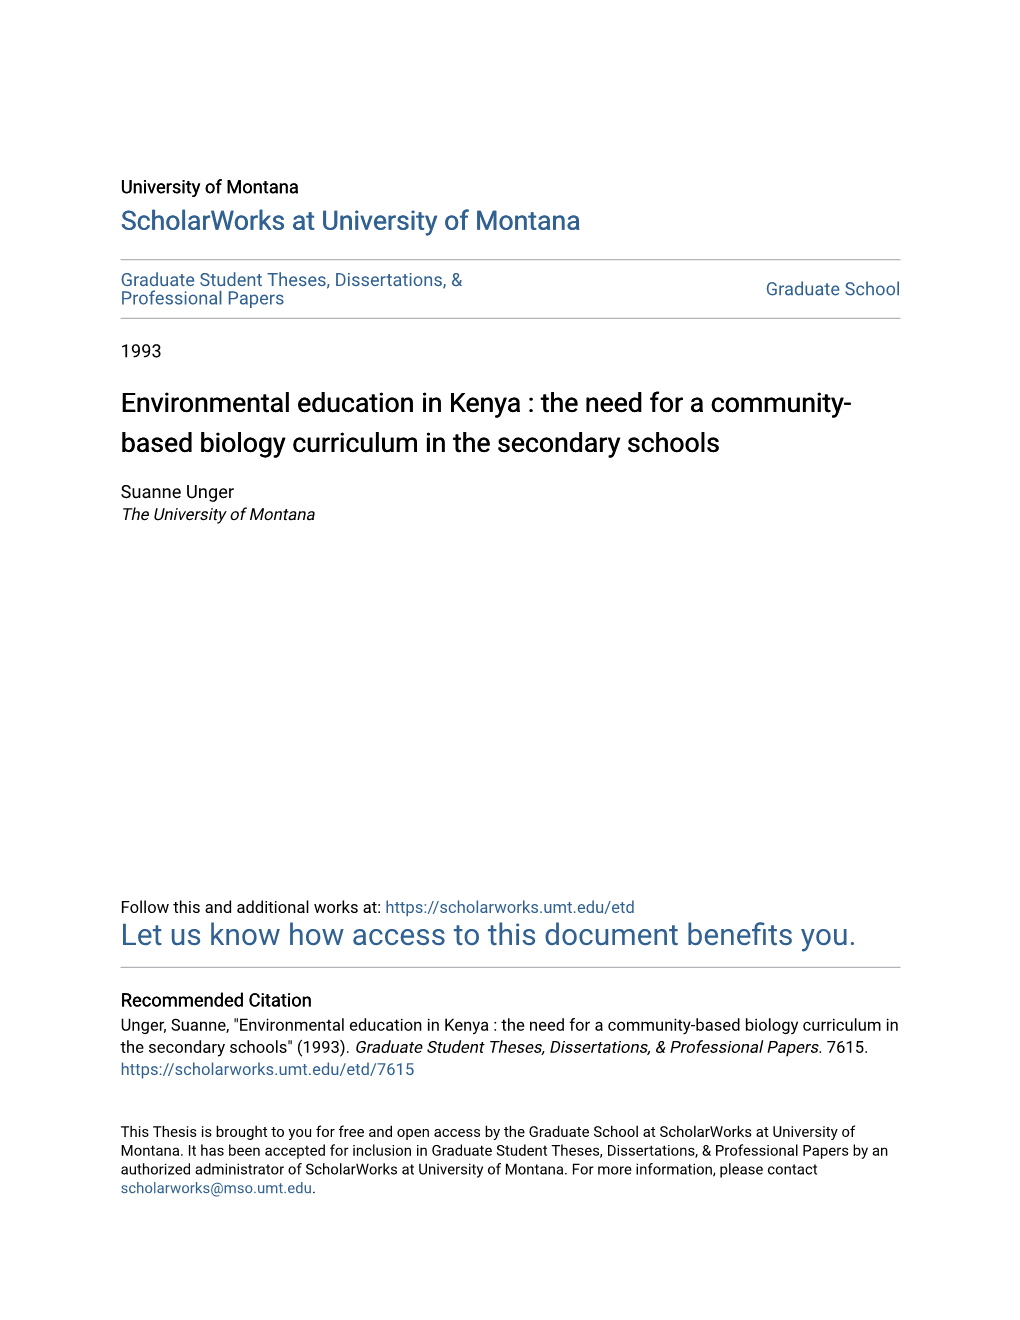 Environmental Education in Kenya : the Need for a Community- Based Biology Curriculum in the Secondary Schools